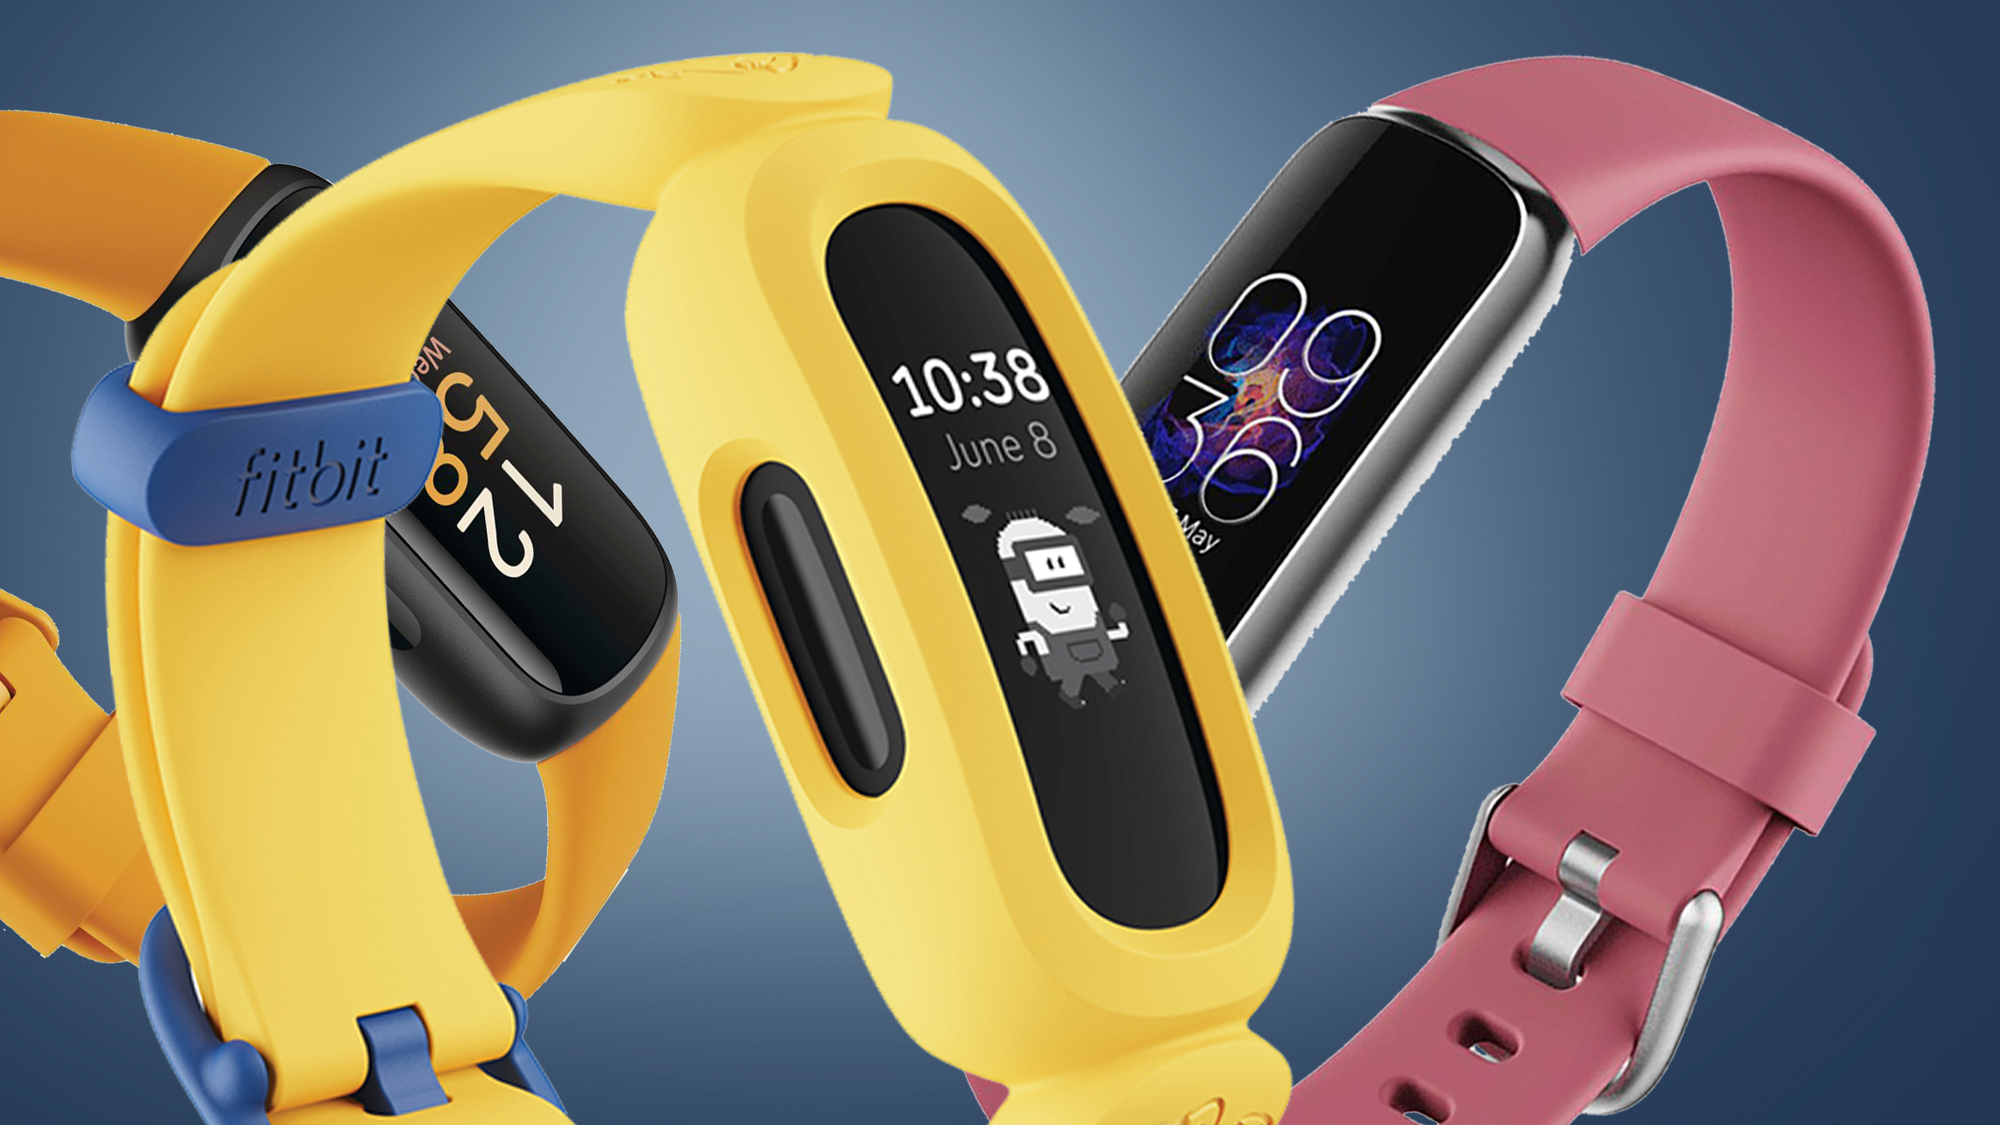 Source: New Fitbit Charge 6 will look like Charge 5 - 9to5Google